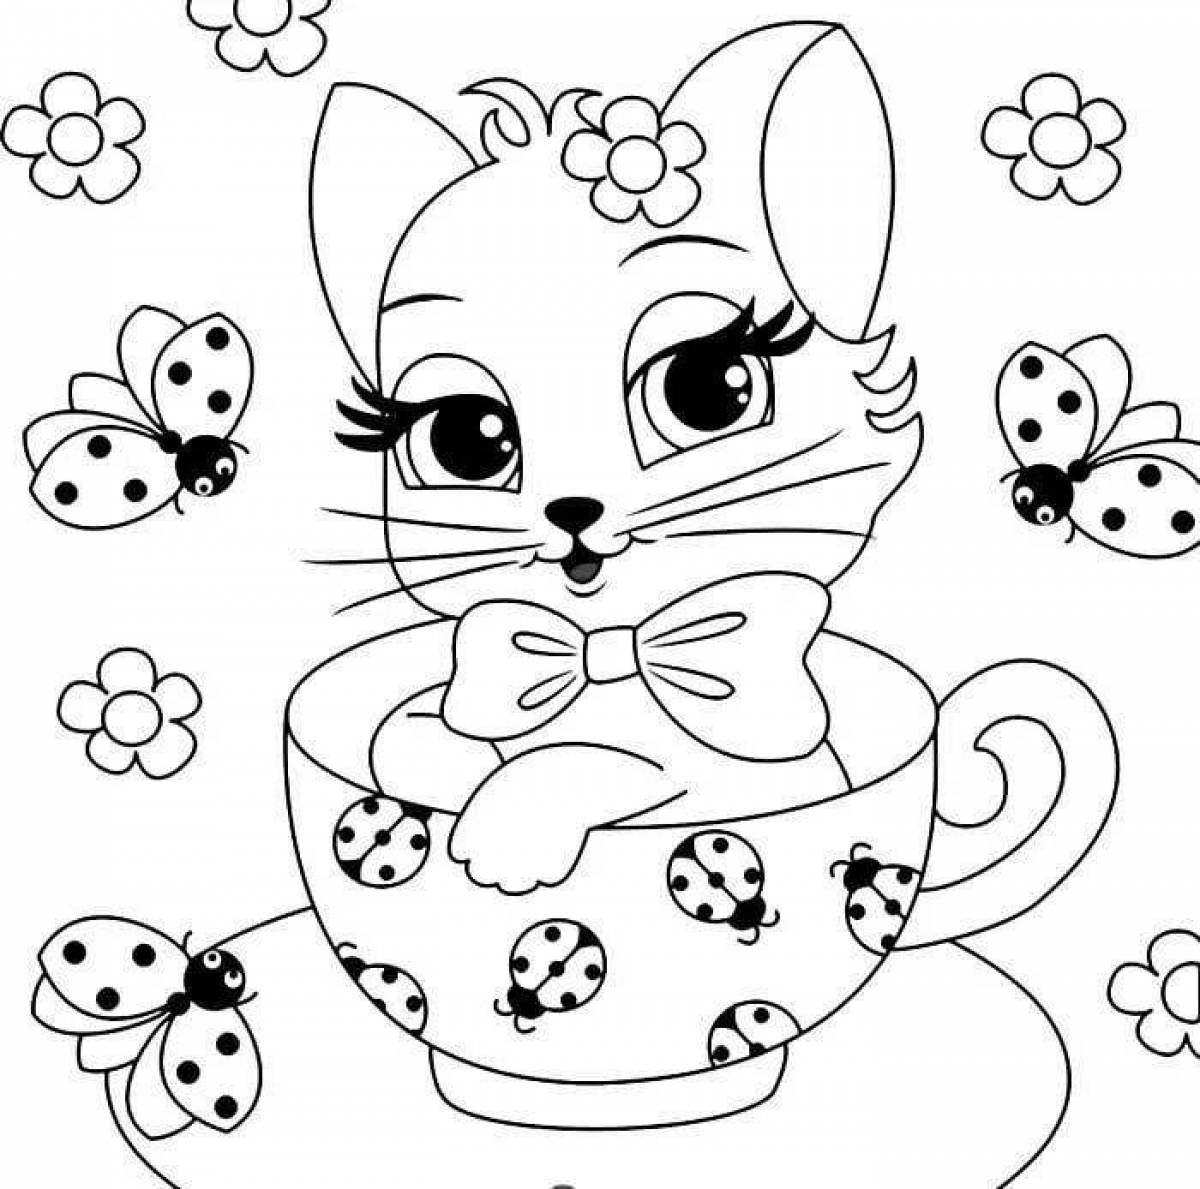 Cute kitten coloring book for 5-6 year olds